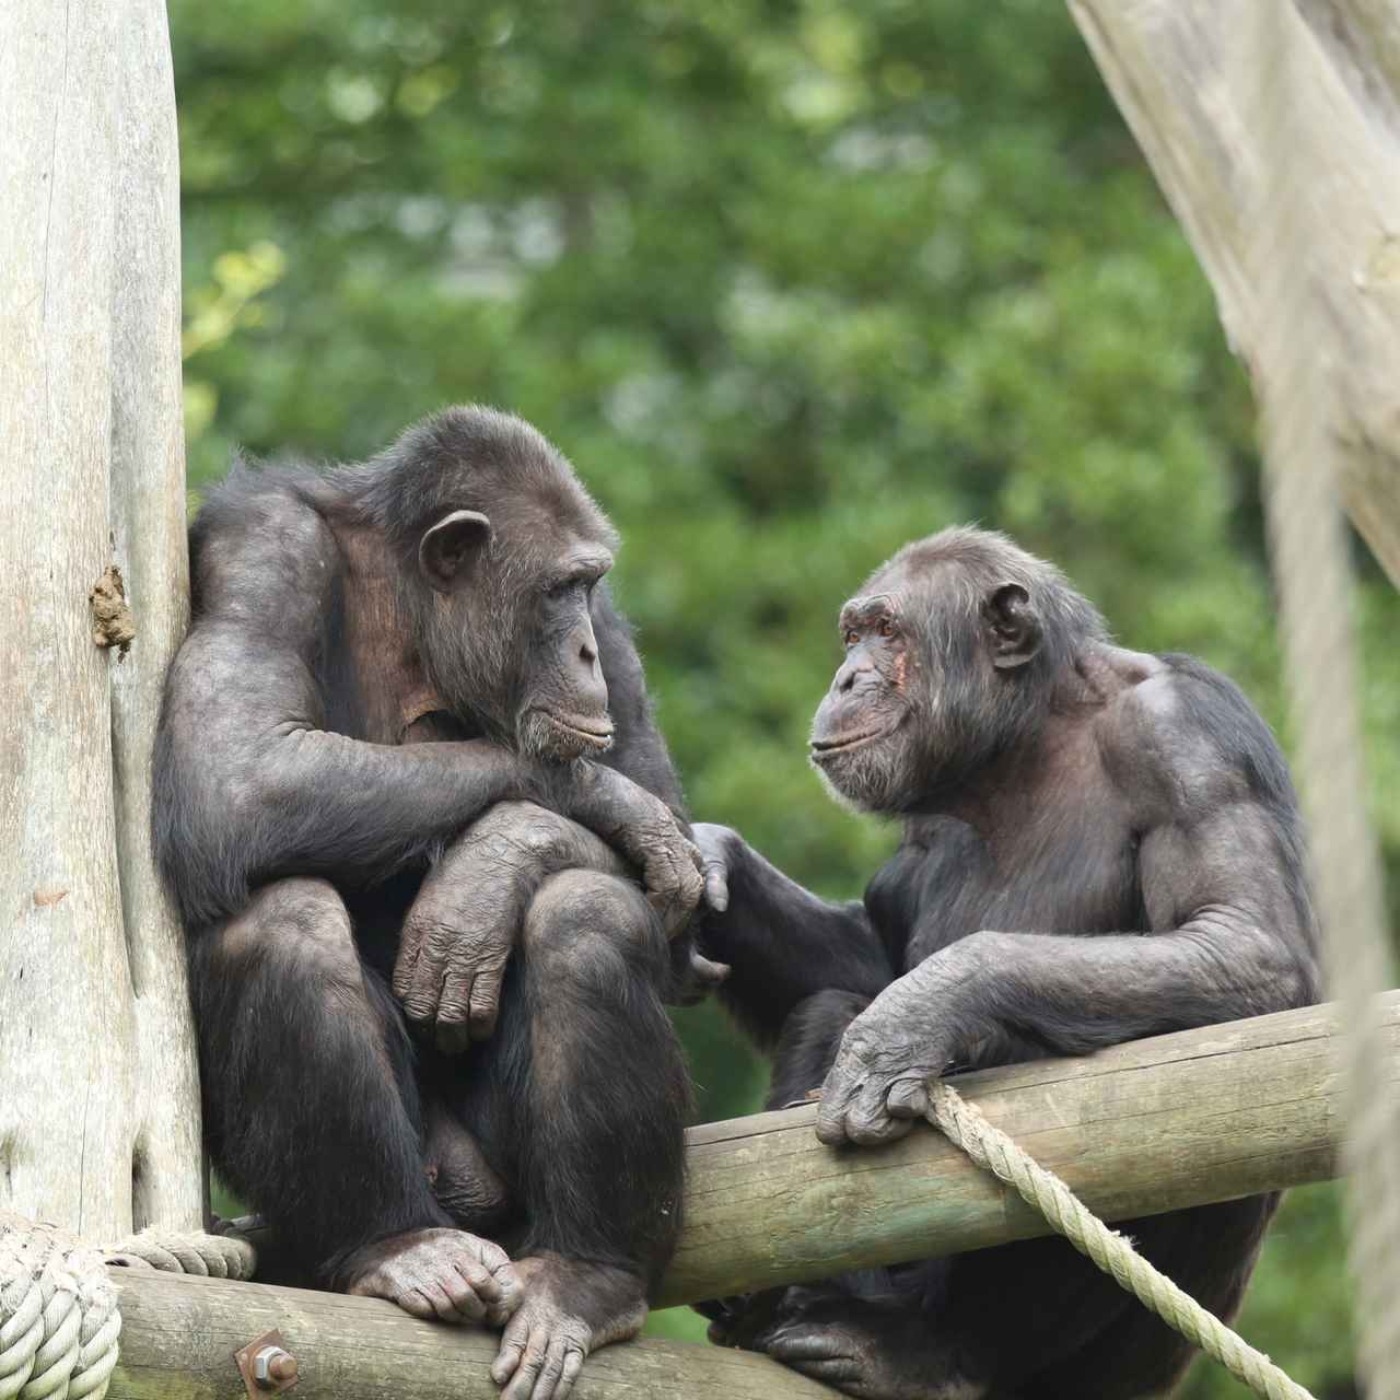 117: Bonobos and chimps show ’a rich recognition’ for long-lost friends and family